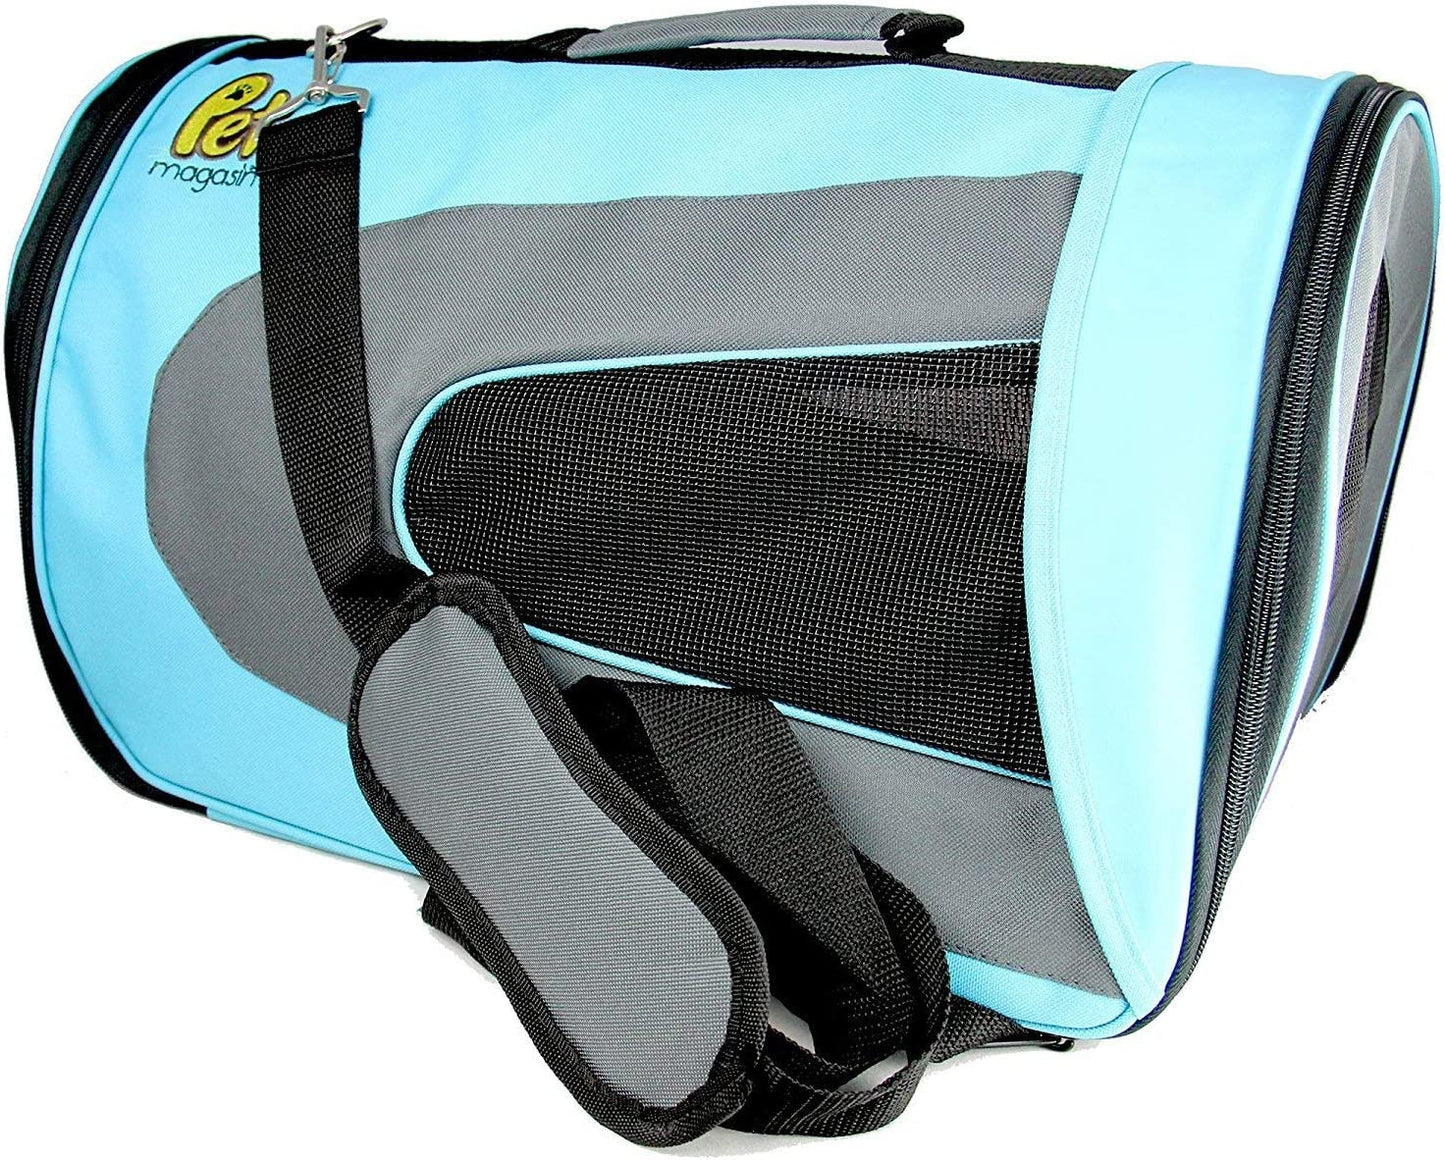 Soft-Sided Pet Travel Carrier (Airline Approved) for Cats, Small Dogs, Puppies and Other Pets by (Large, Blue)